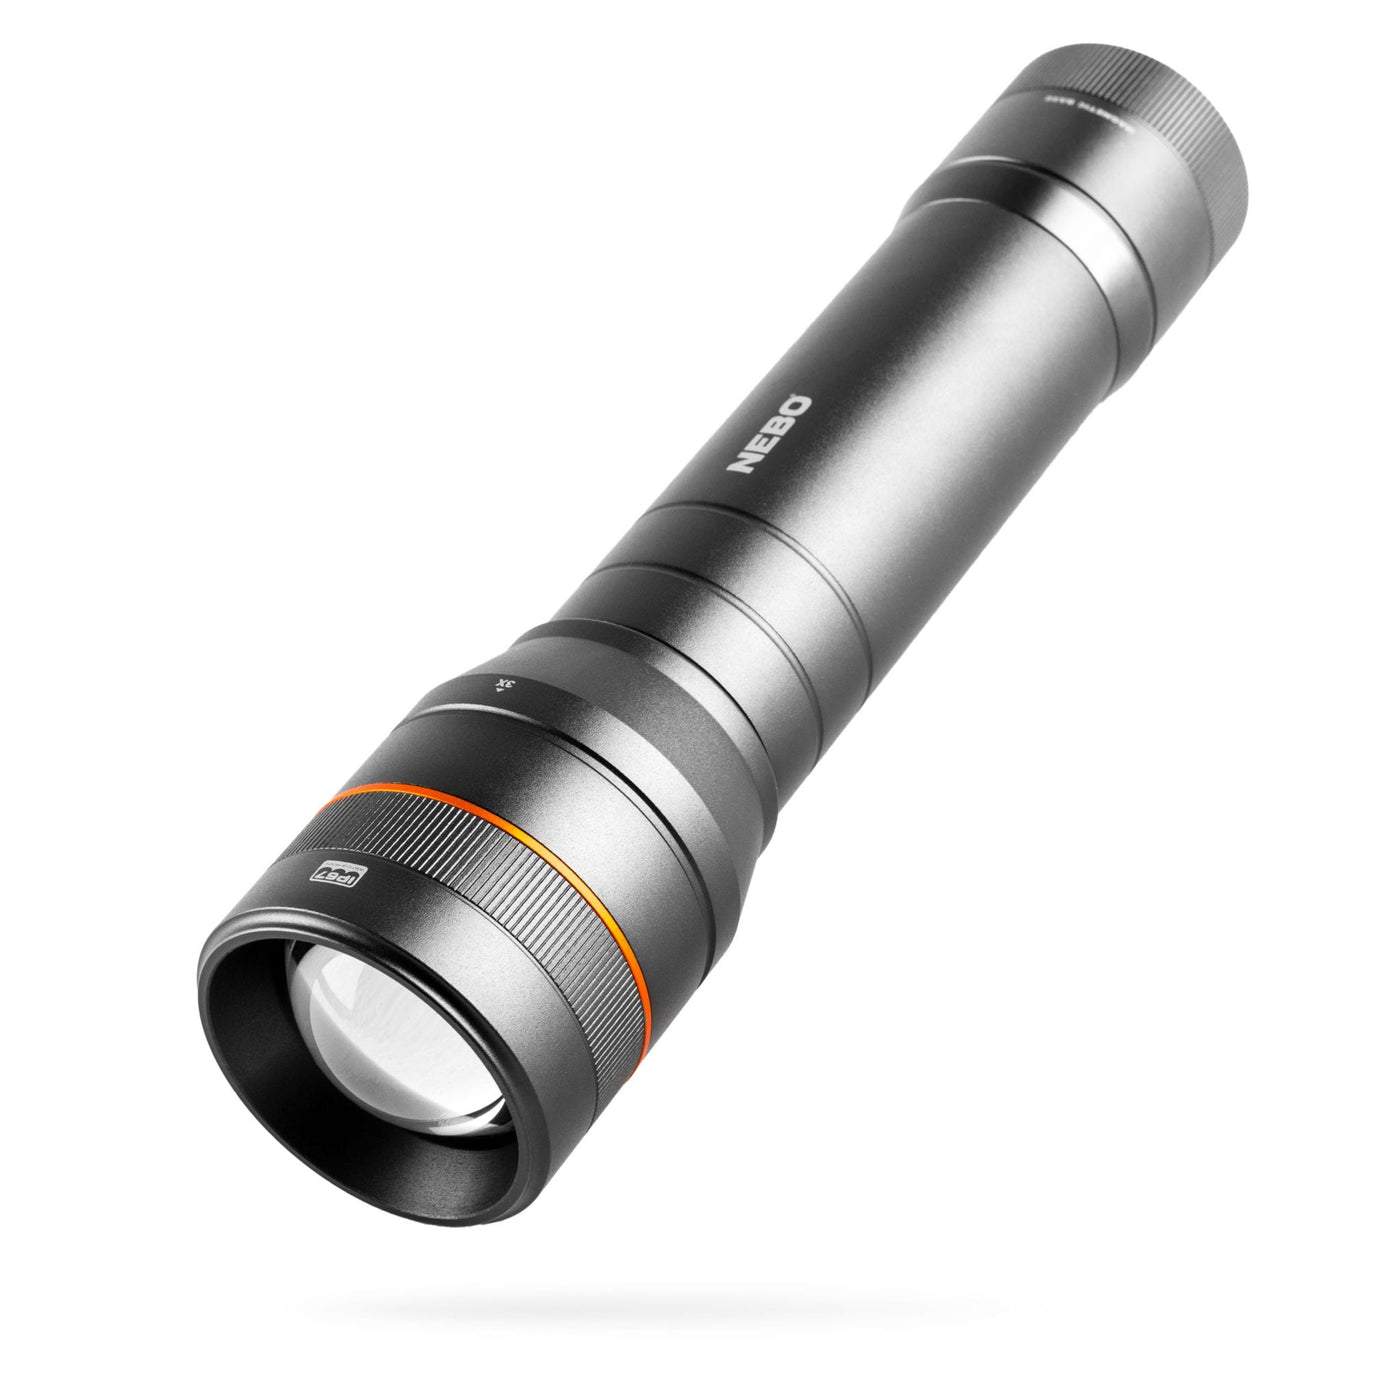 At Nebo Tools, we continually innovate so that we can offer the highest quality LED lighting products at the best price.  The Newton™ 1500 lumen flashlight by NEBO is a powerful handheld flashlight with 4 light modes. The included mode selection dial makes it easy to switch between modes and the powerful LED in this flashlight can light up 182 meters.